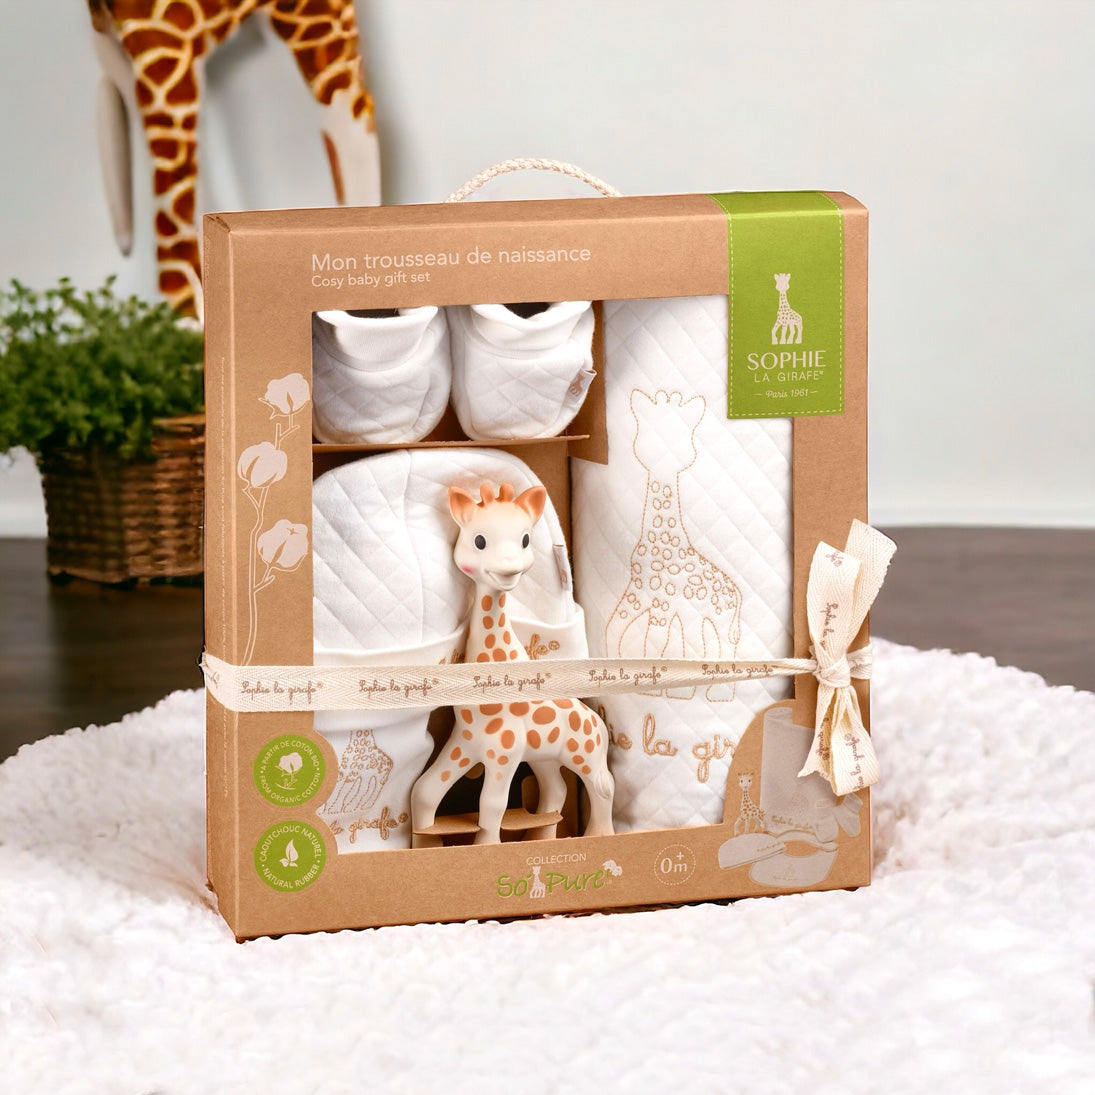 Sophie the Giraffe So Pure "My Birth Outfit" Cosy Baby Gift Set